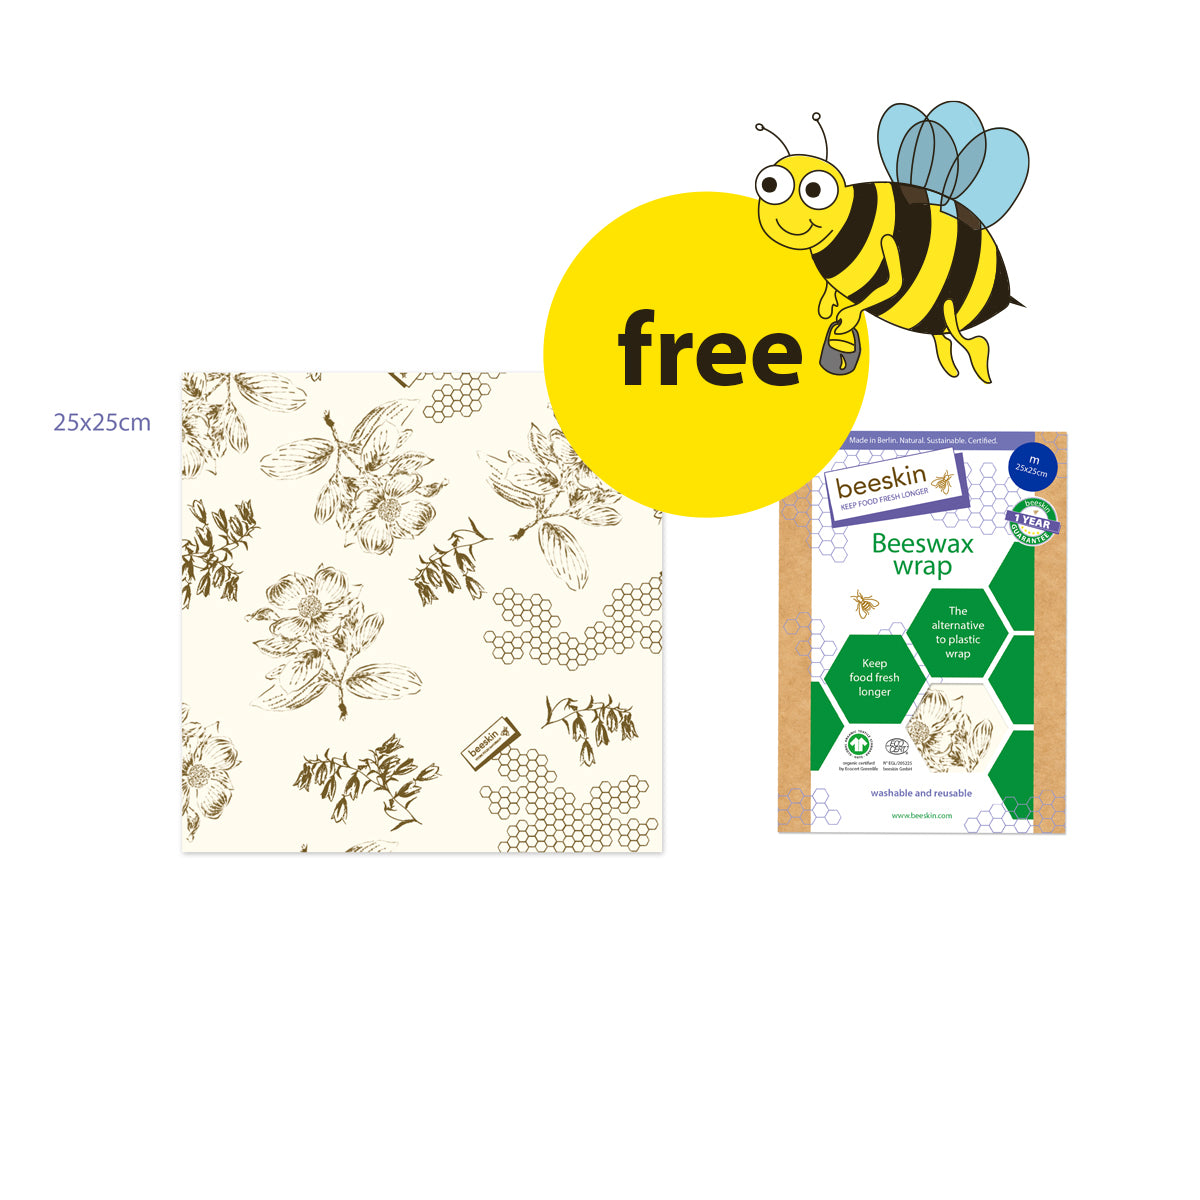 beeskin beeswax wrap flower design and a big yellow button free with a funny bee next to packaging